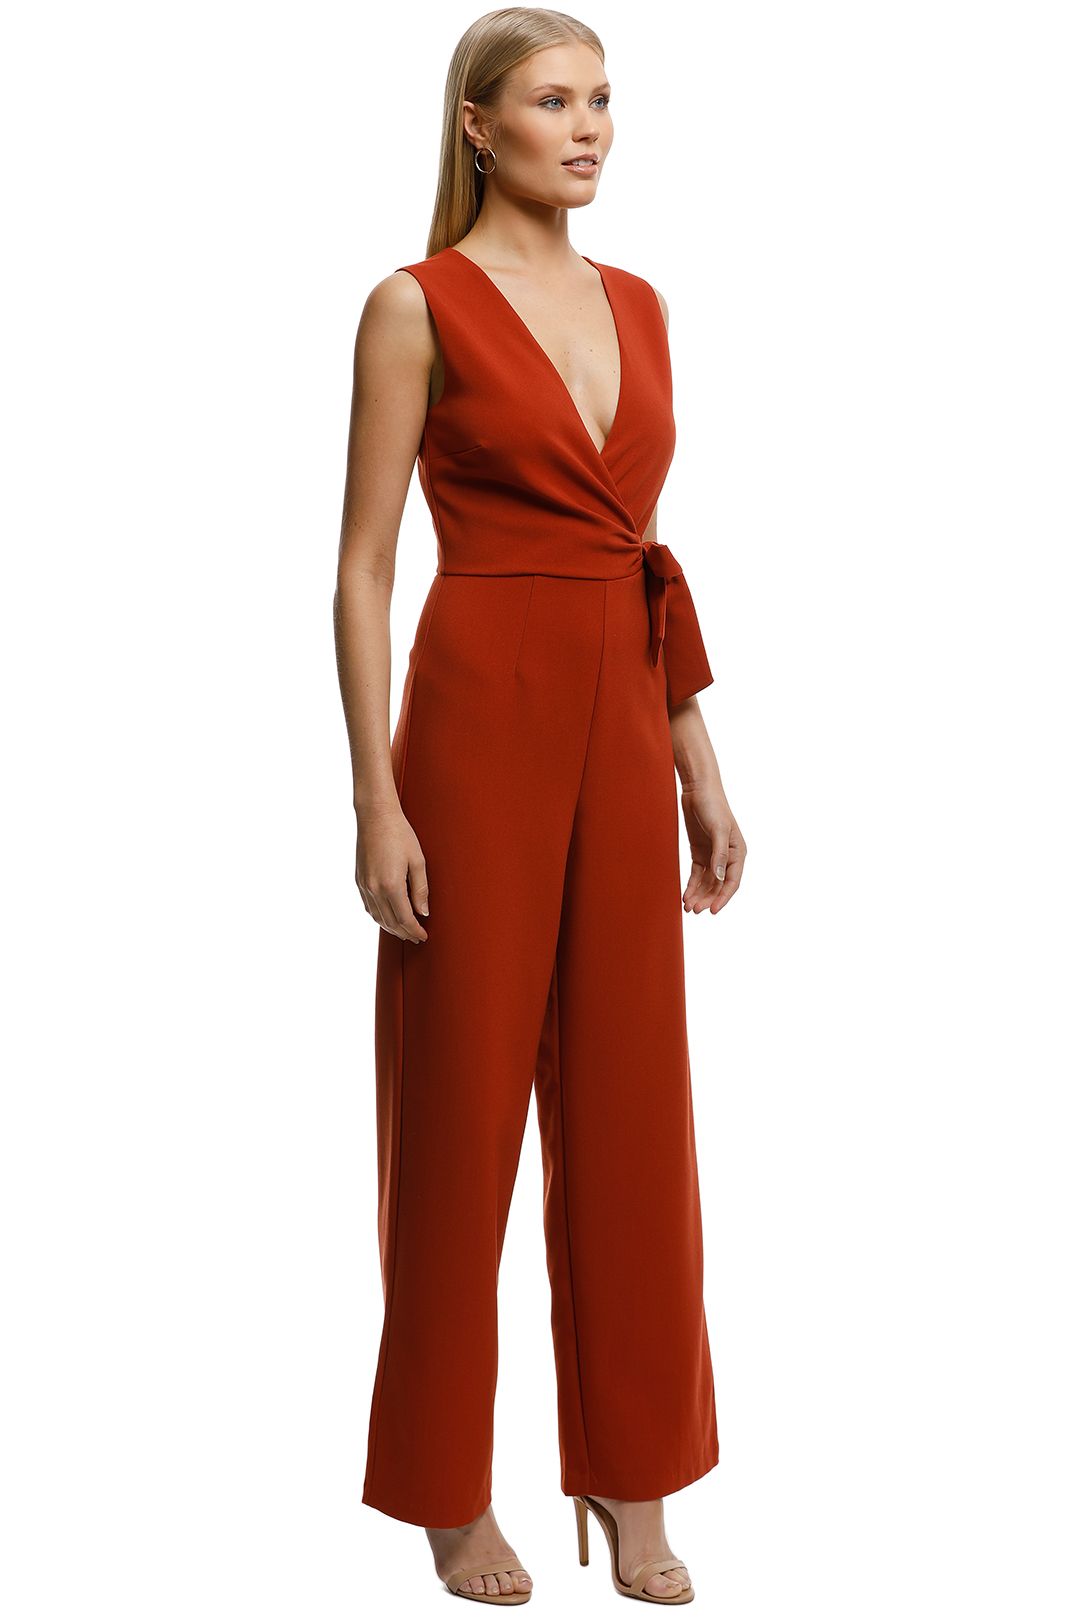 WISH-Moments-Jumpsuit-Rust-Side